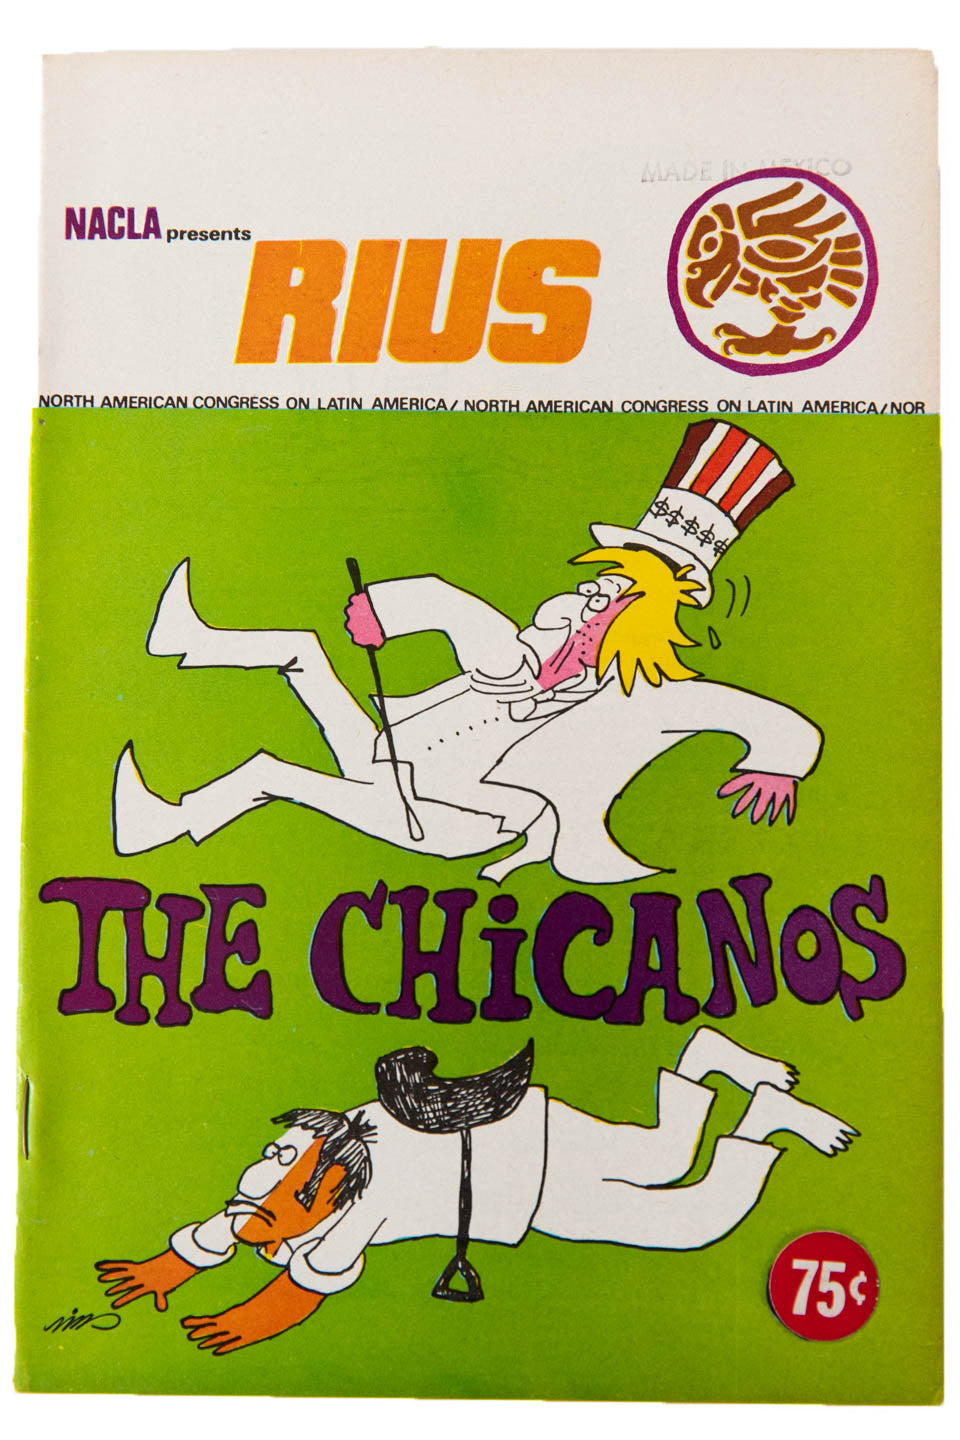 THE CHICANOS